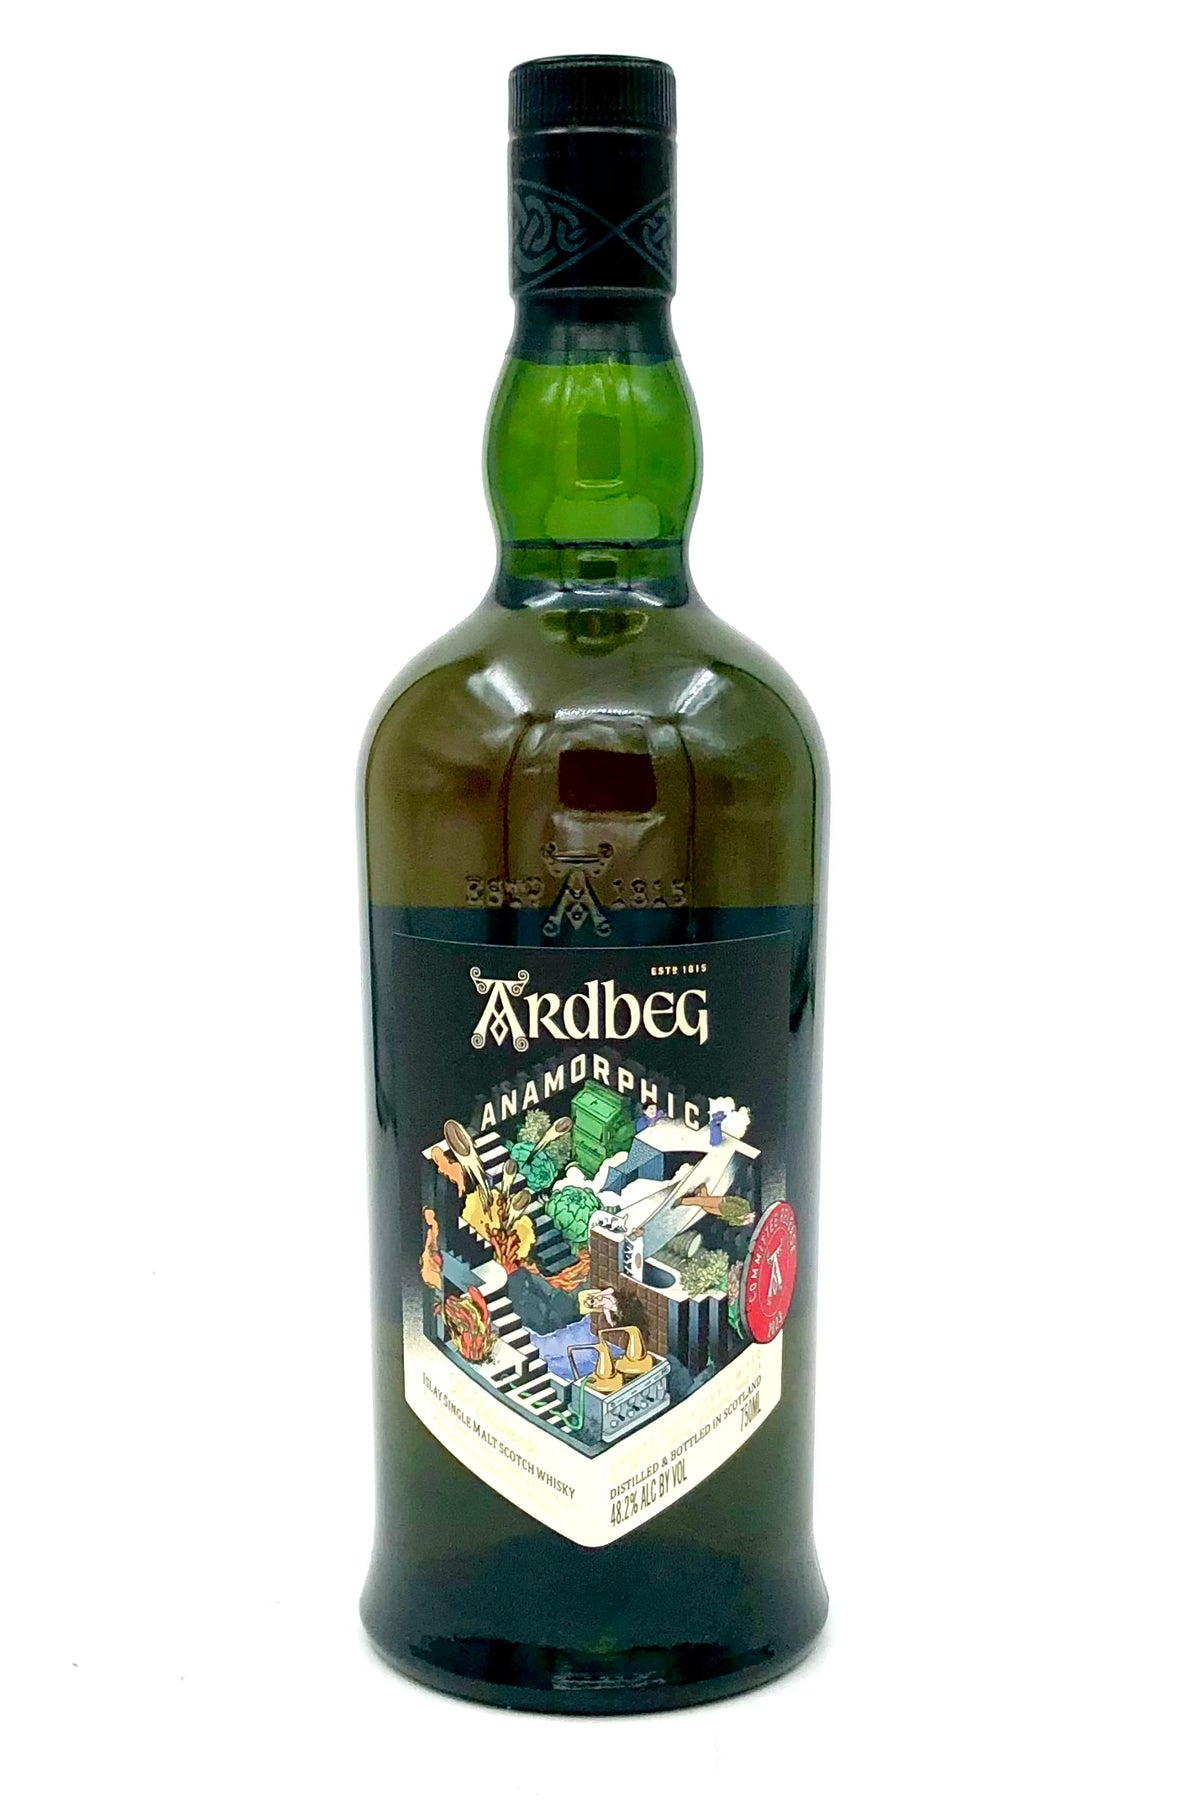 Ardbeg Anamorphic Committee Release Scotch Whisky